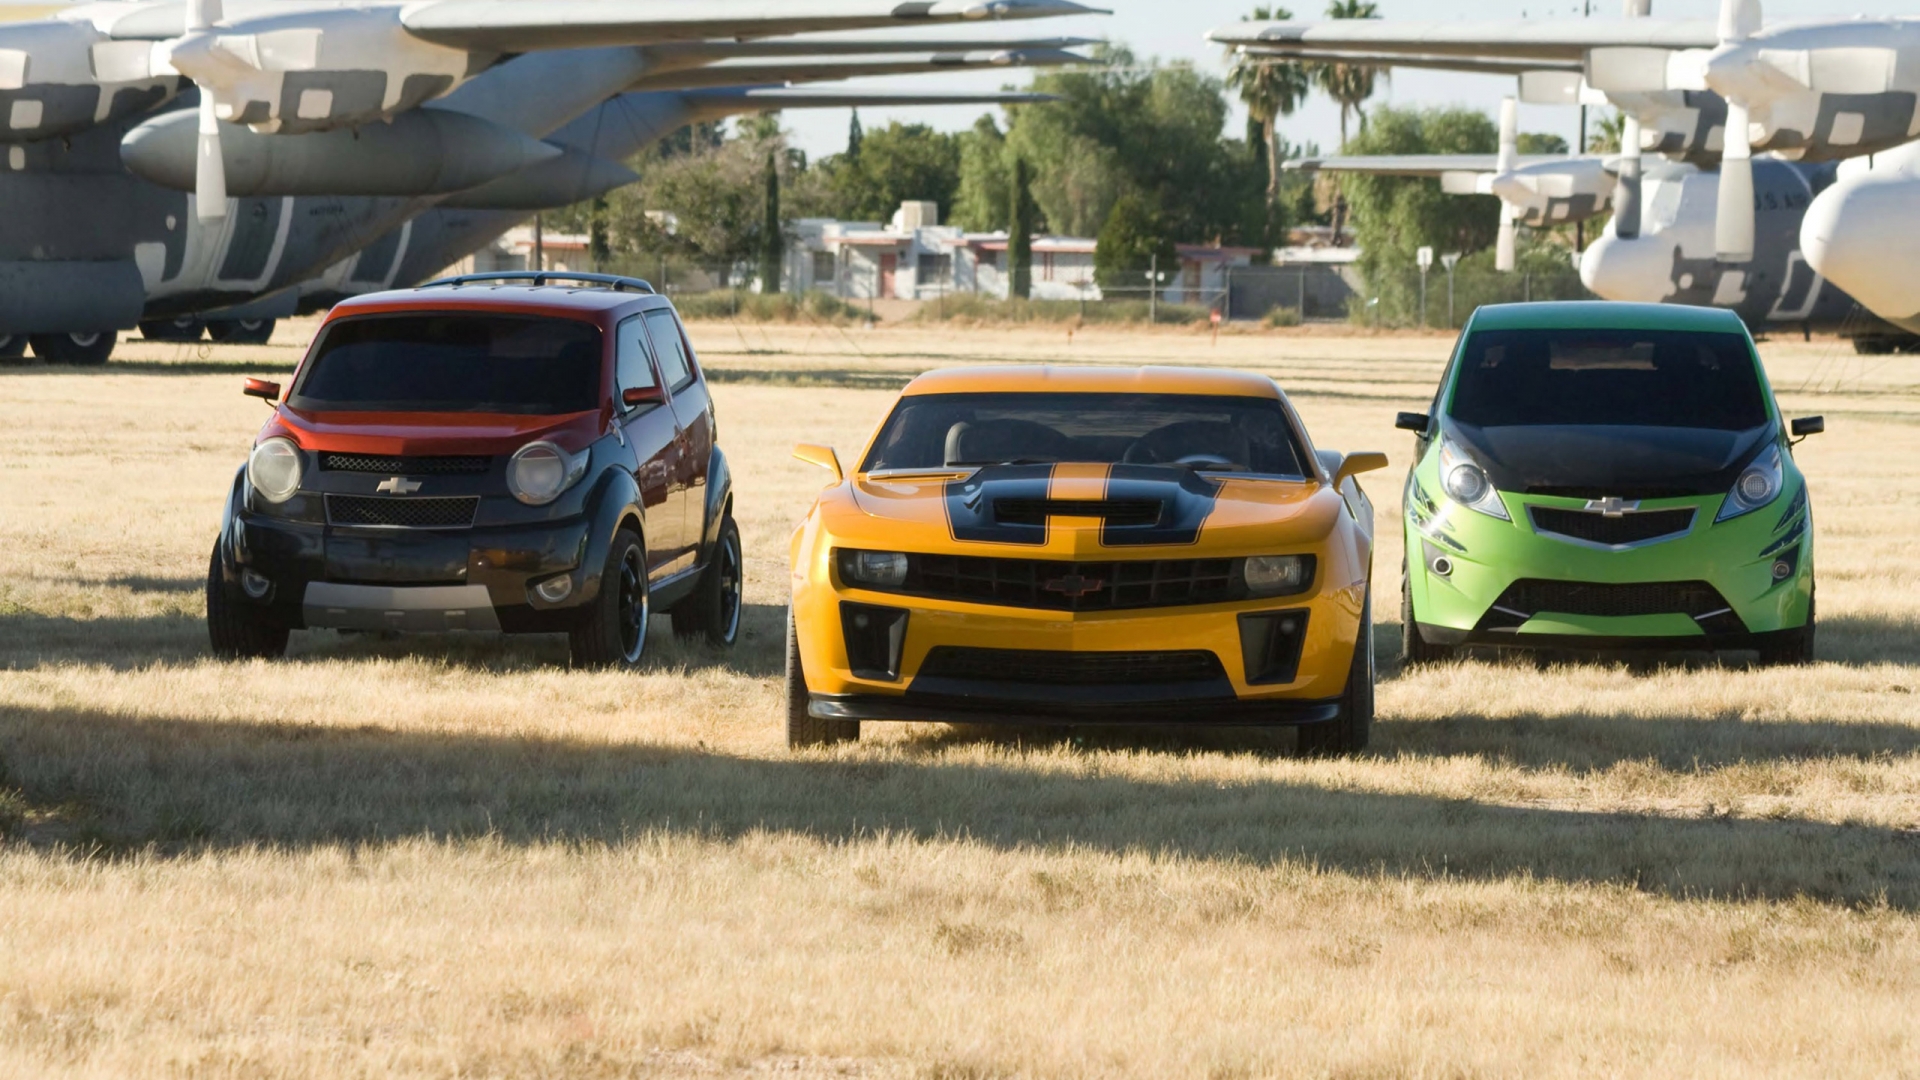 Cars from Transformers for 1920 x 1080 HDTV 1080p resolution